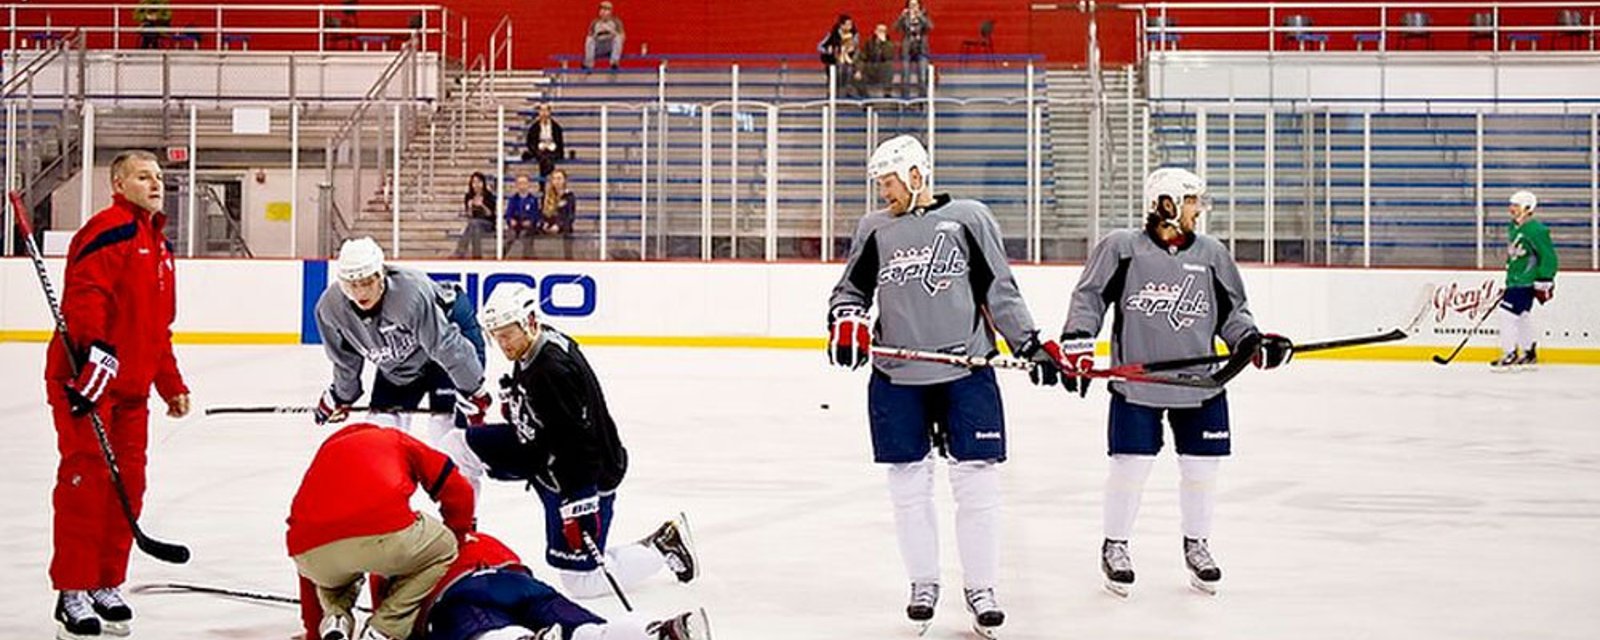 Ovechkin injured during practice, helped off the ice by teammates